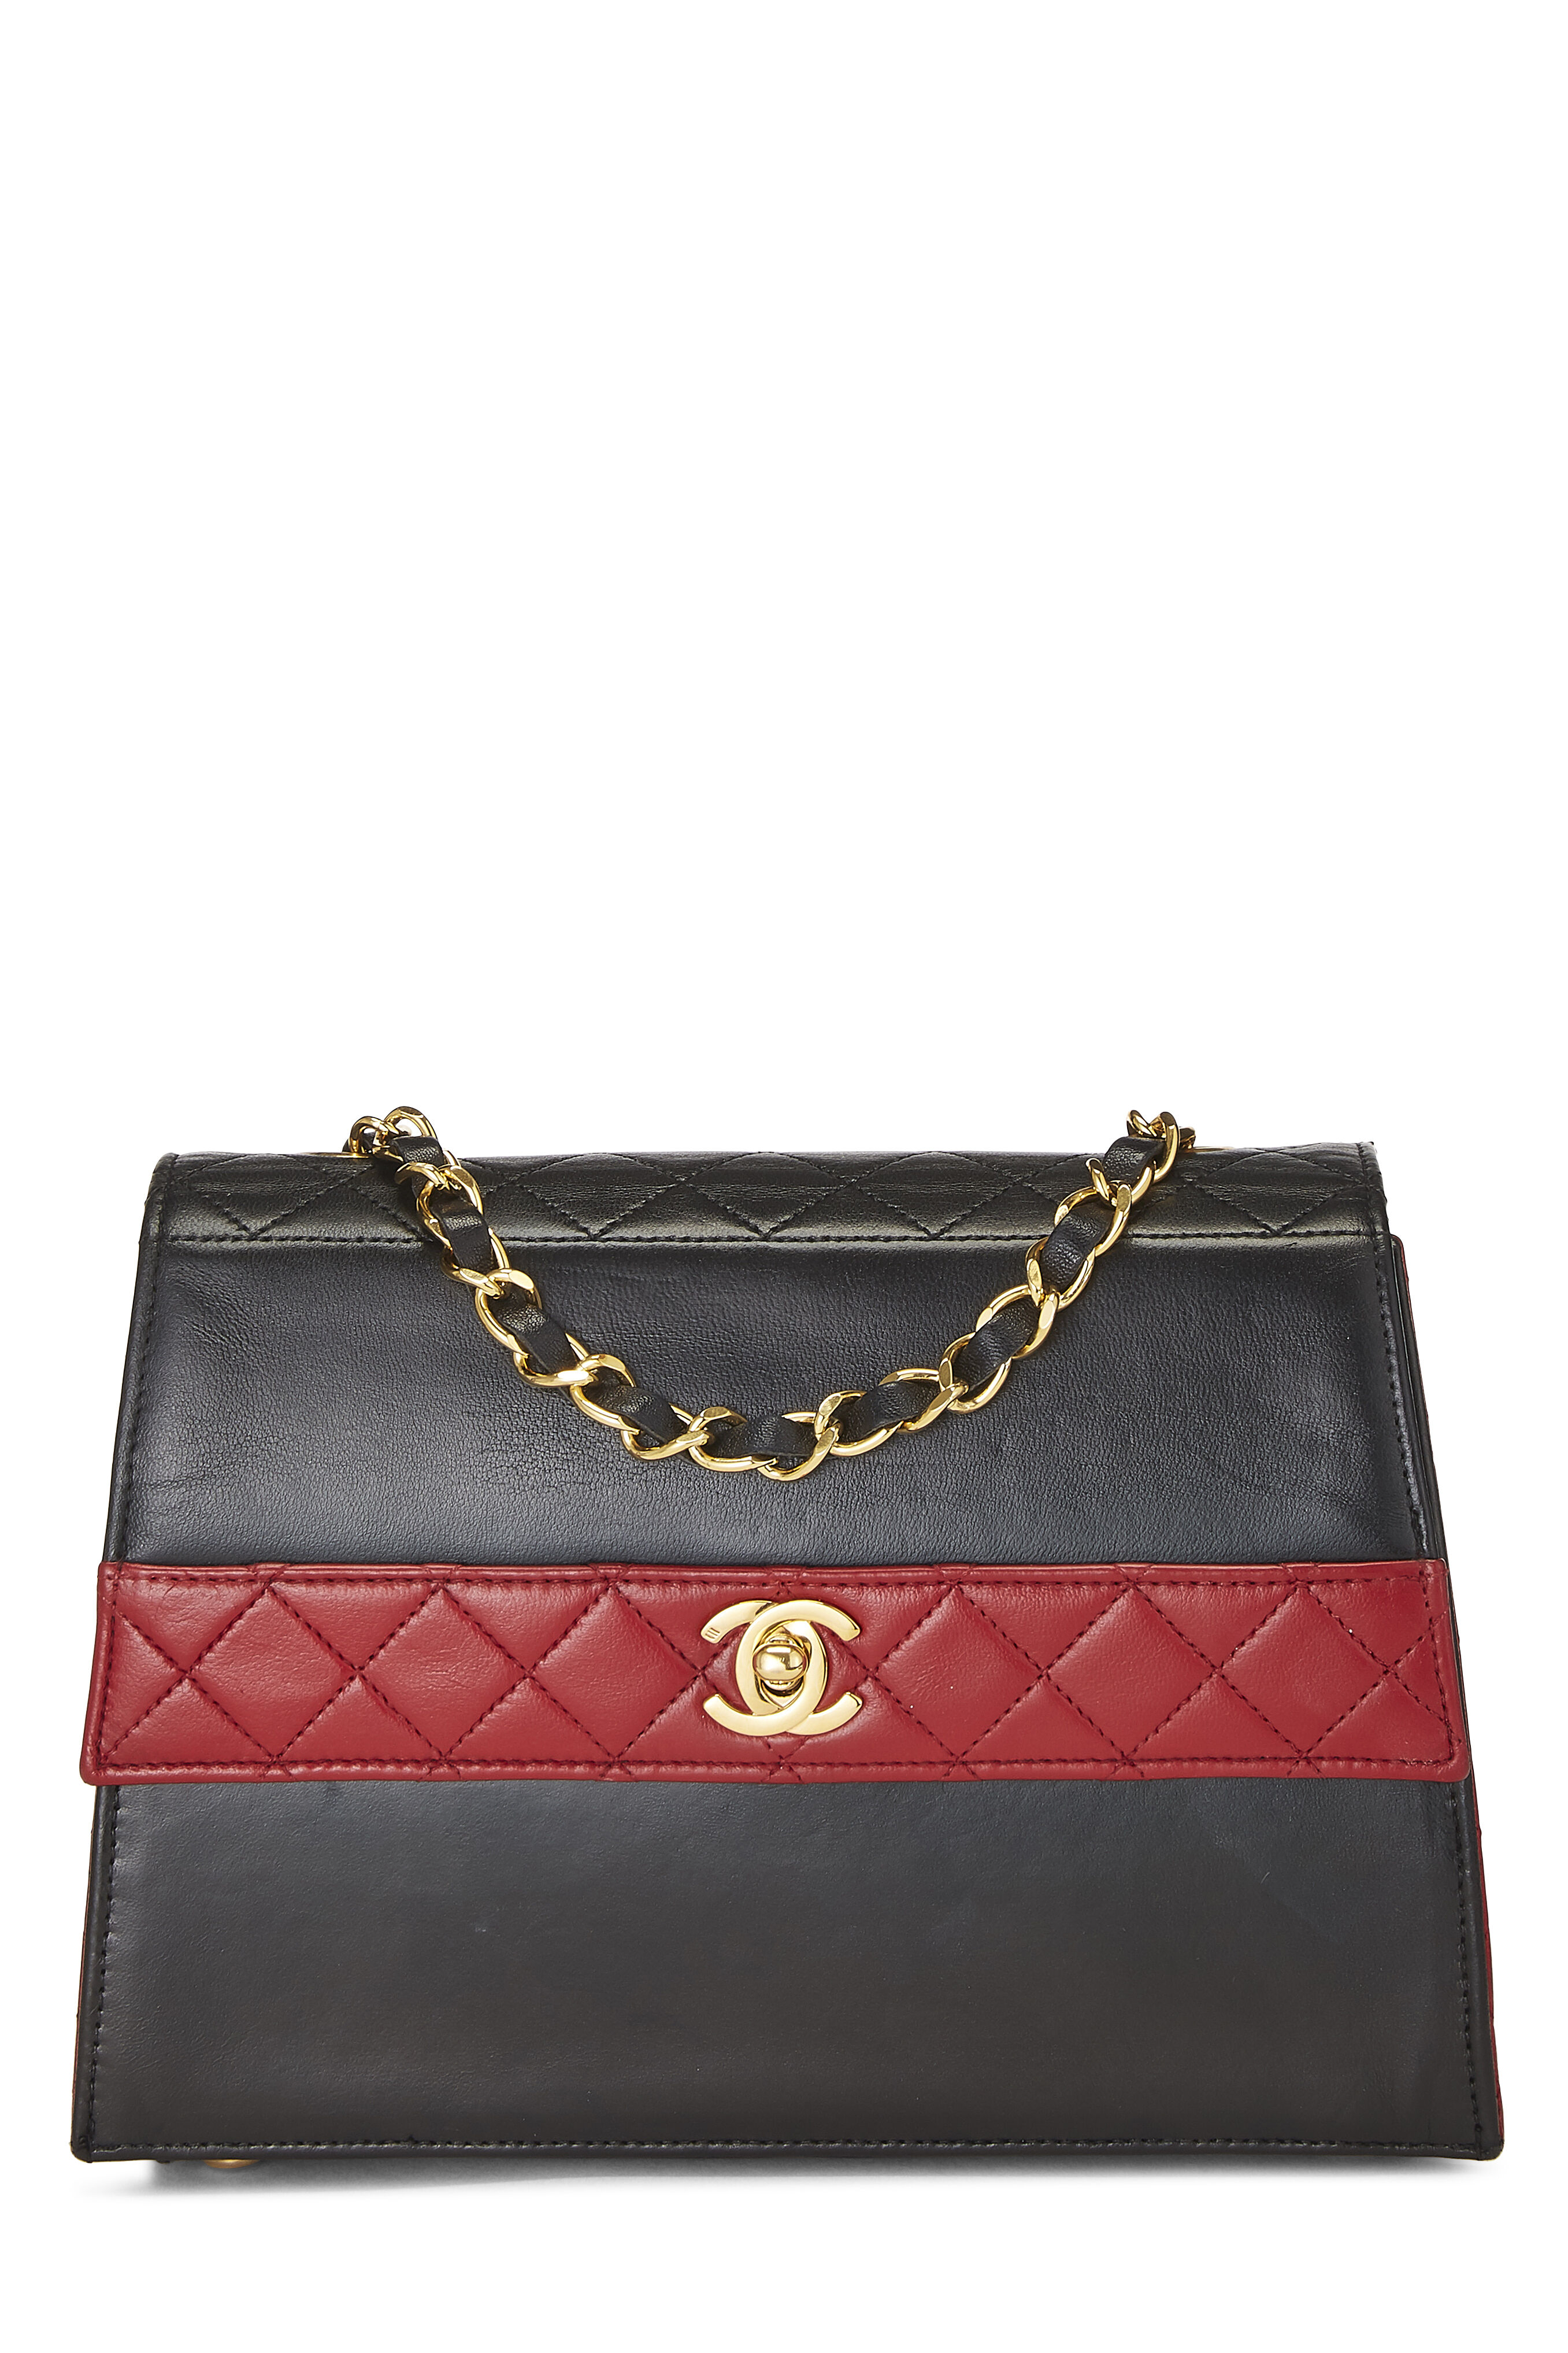 Chanel - Black & Red Quilted Lambskin Trapezoid Shoulder Bag